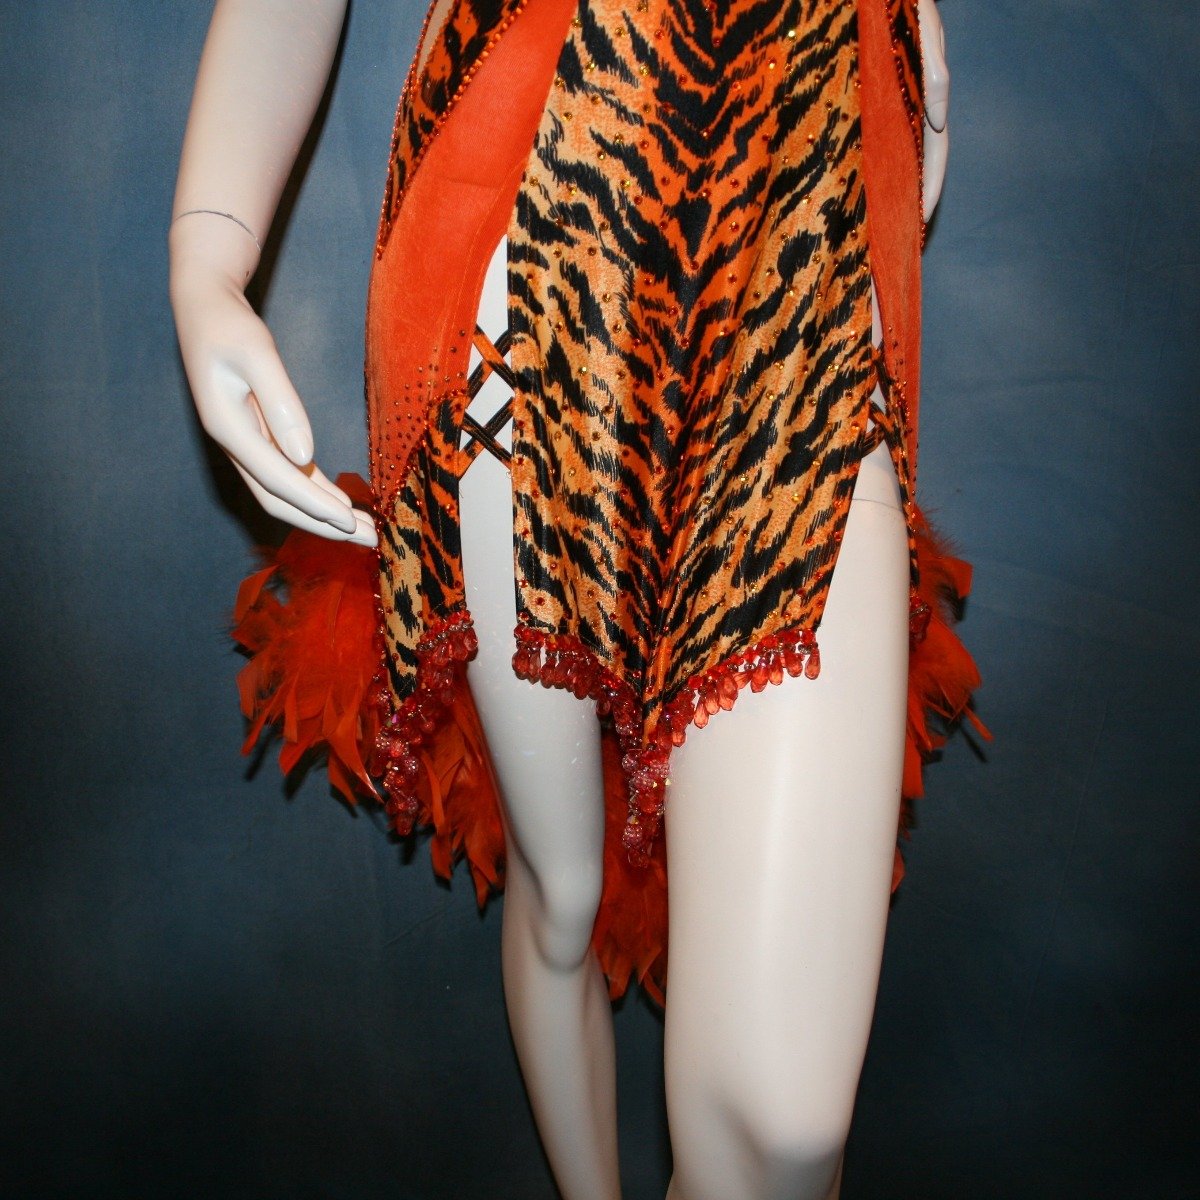 Crystal's Creations close up bottom view of orange & black tiger print Latin/rhythm dress with chandelle feathers & hand beading